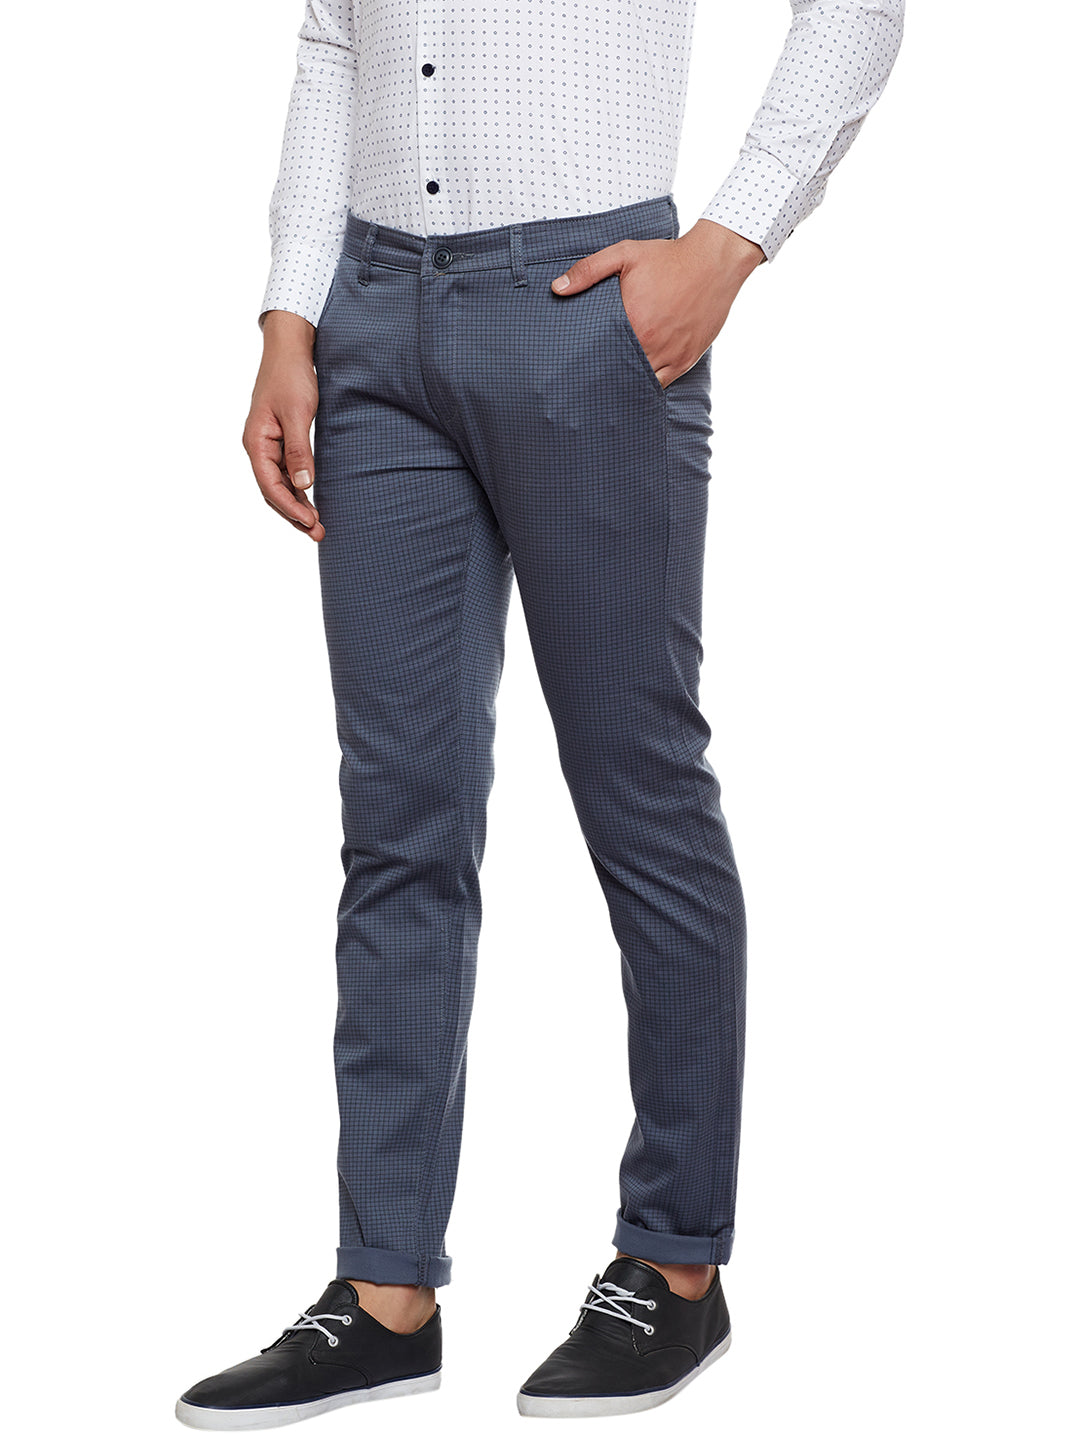 Men Grey Checked Slim Fit Casual Stretchable Chinos Trouser